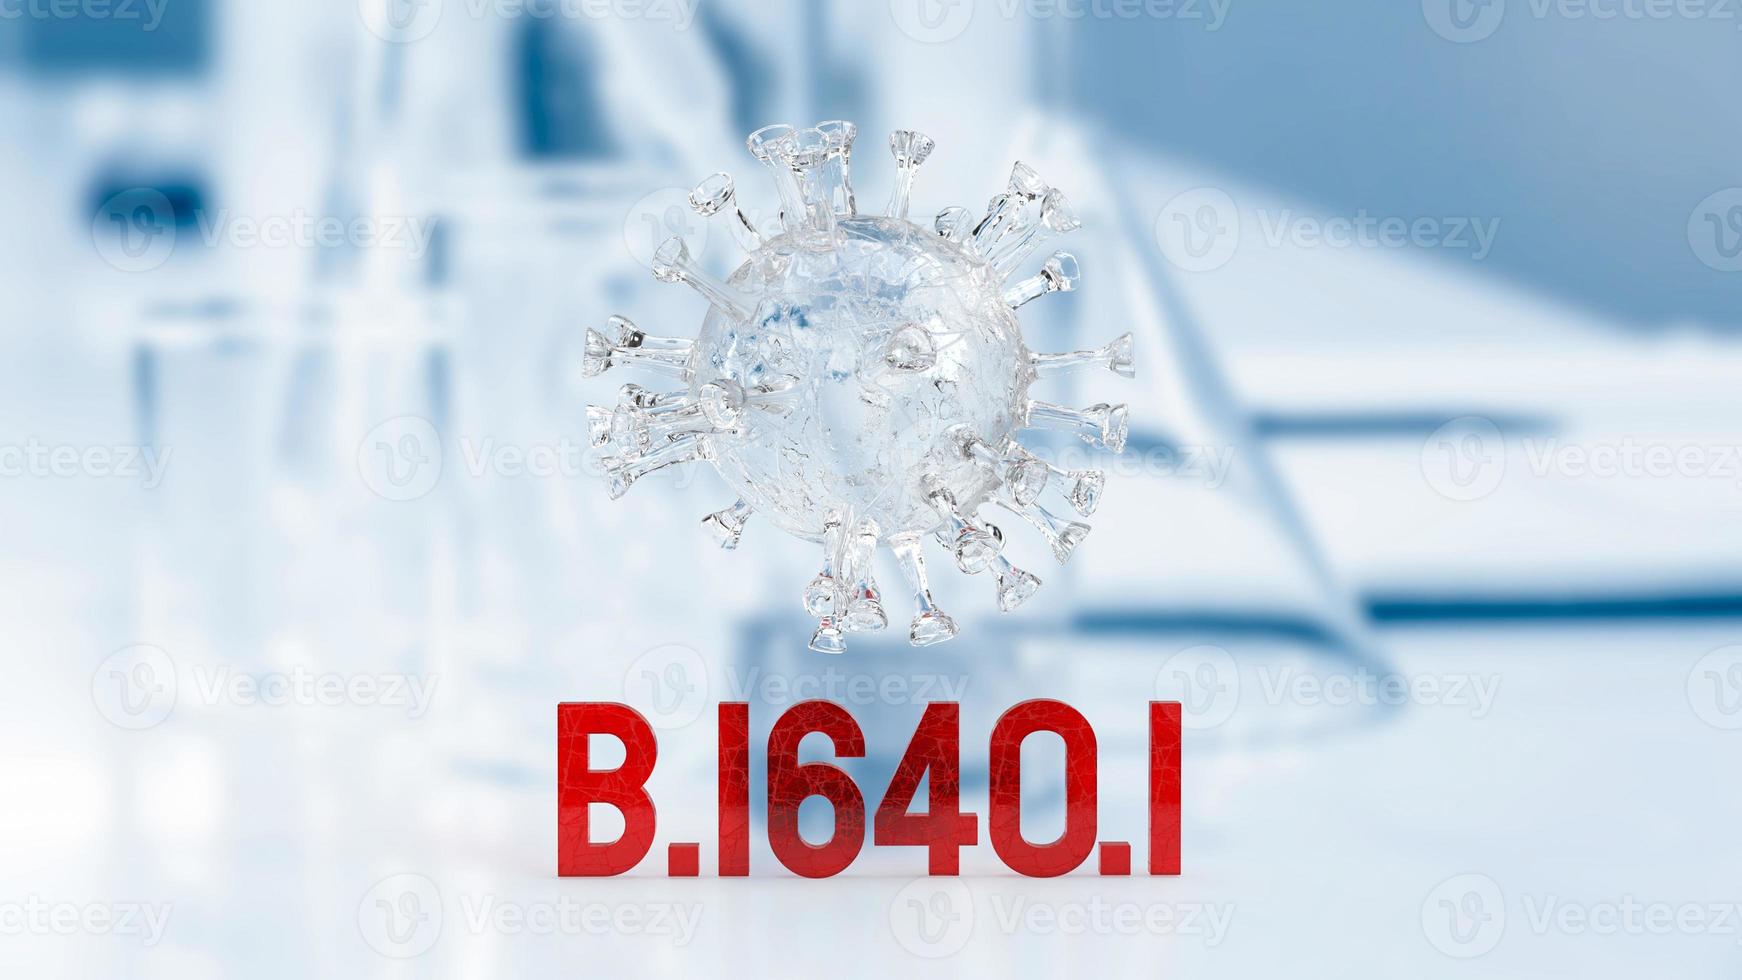 The clear virus and red text b.1640.1 on lab background  3d rendering photo